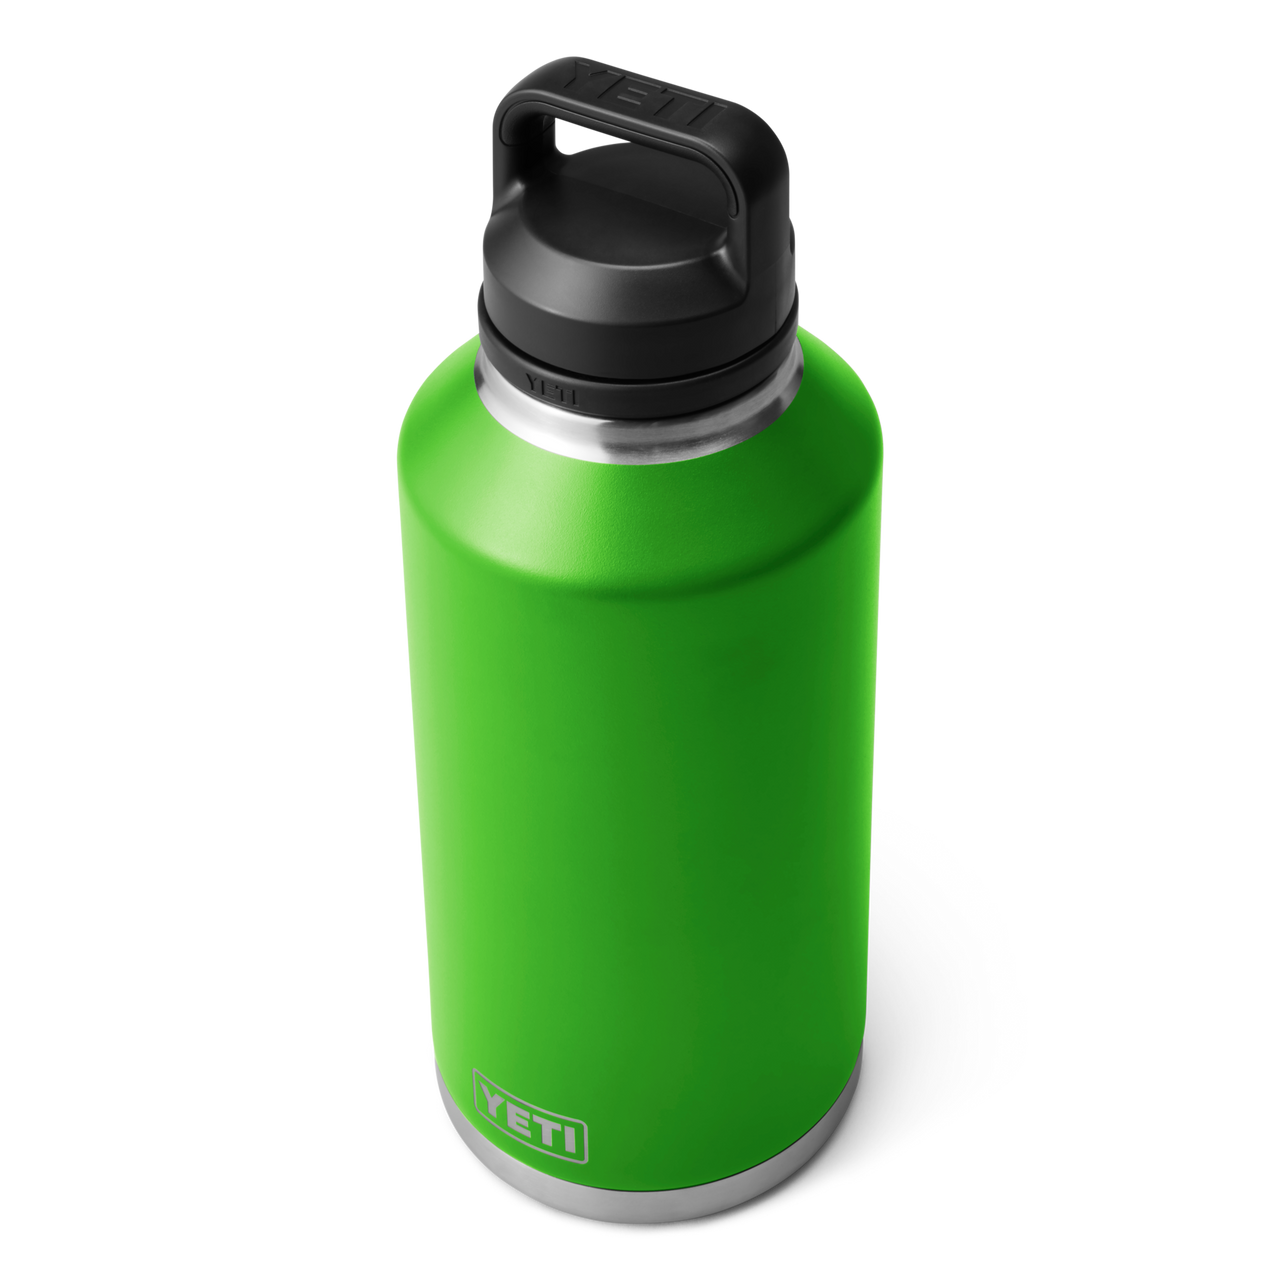 YETI Rambler 64 oz Bottle, Vacuum Insulated, Stainless Steel with Chug Cap,  Canopy Green